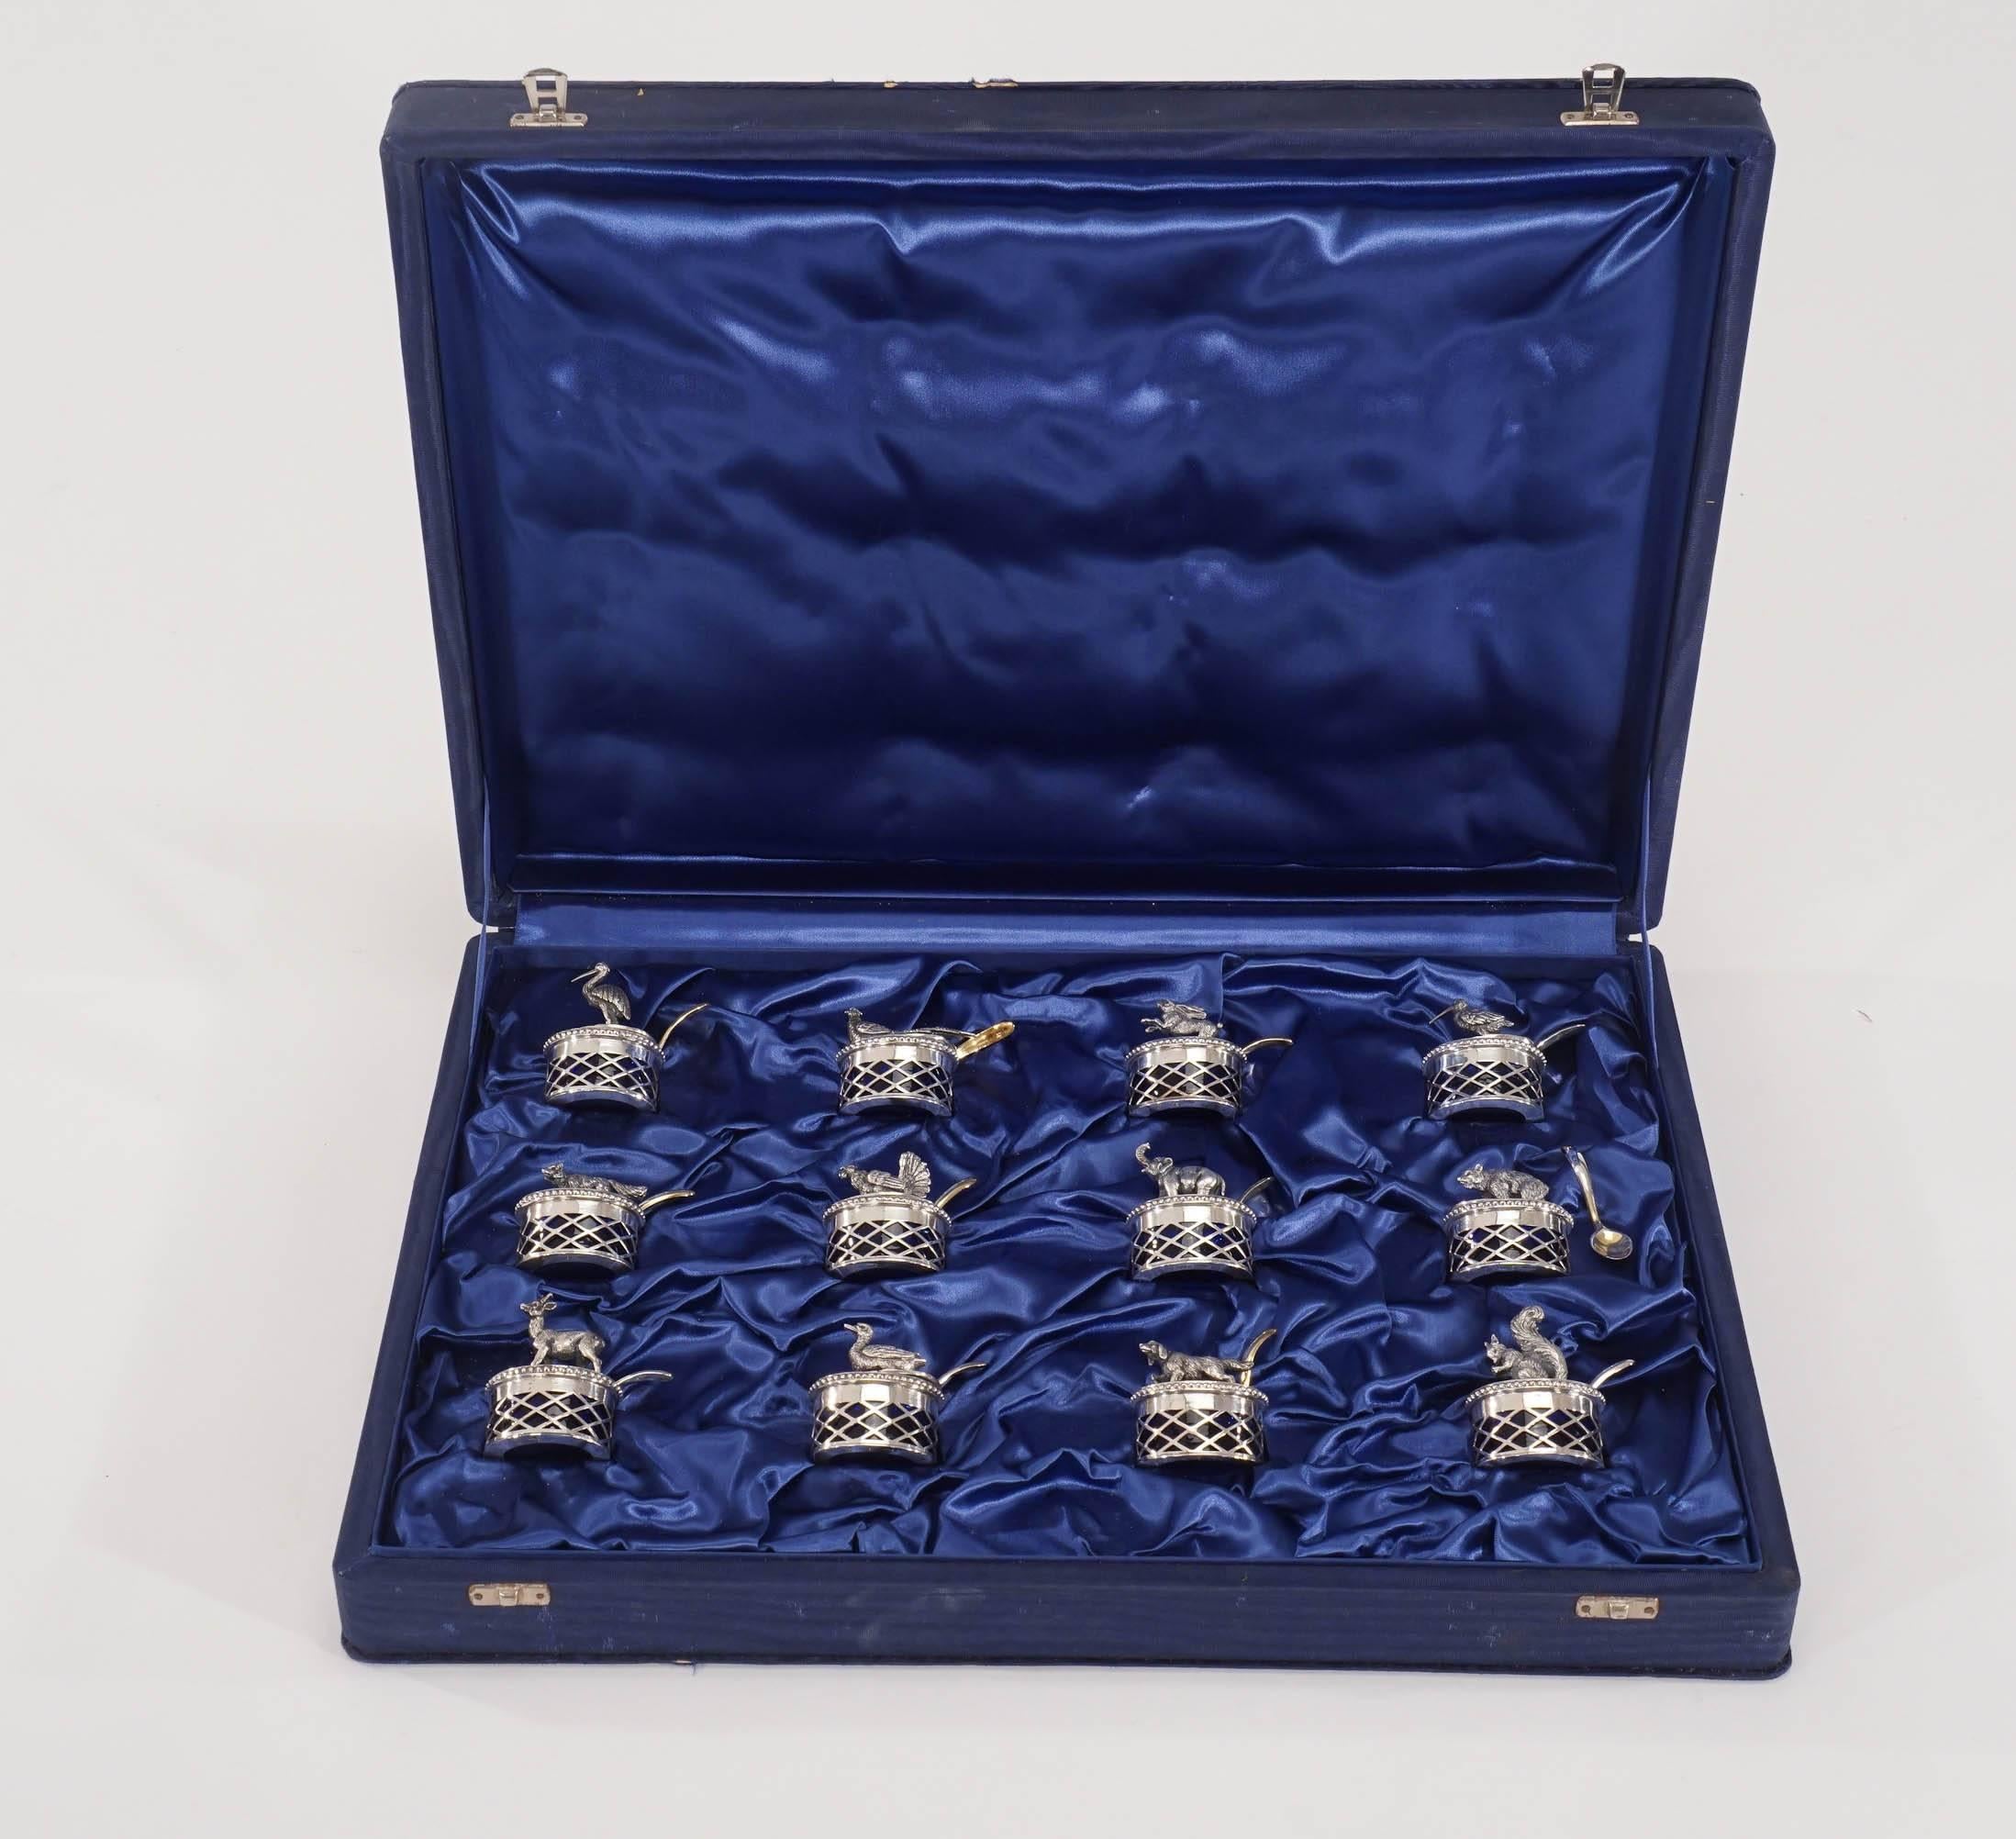 This is the most unusual set of covered salts I have had the pleasure to own. They are a combination of handblown cobalt crystal salts in pierced .800 silver holders, each with a figural game animal perched on the lids. To top them off, each lid